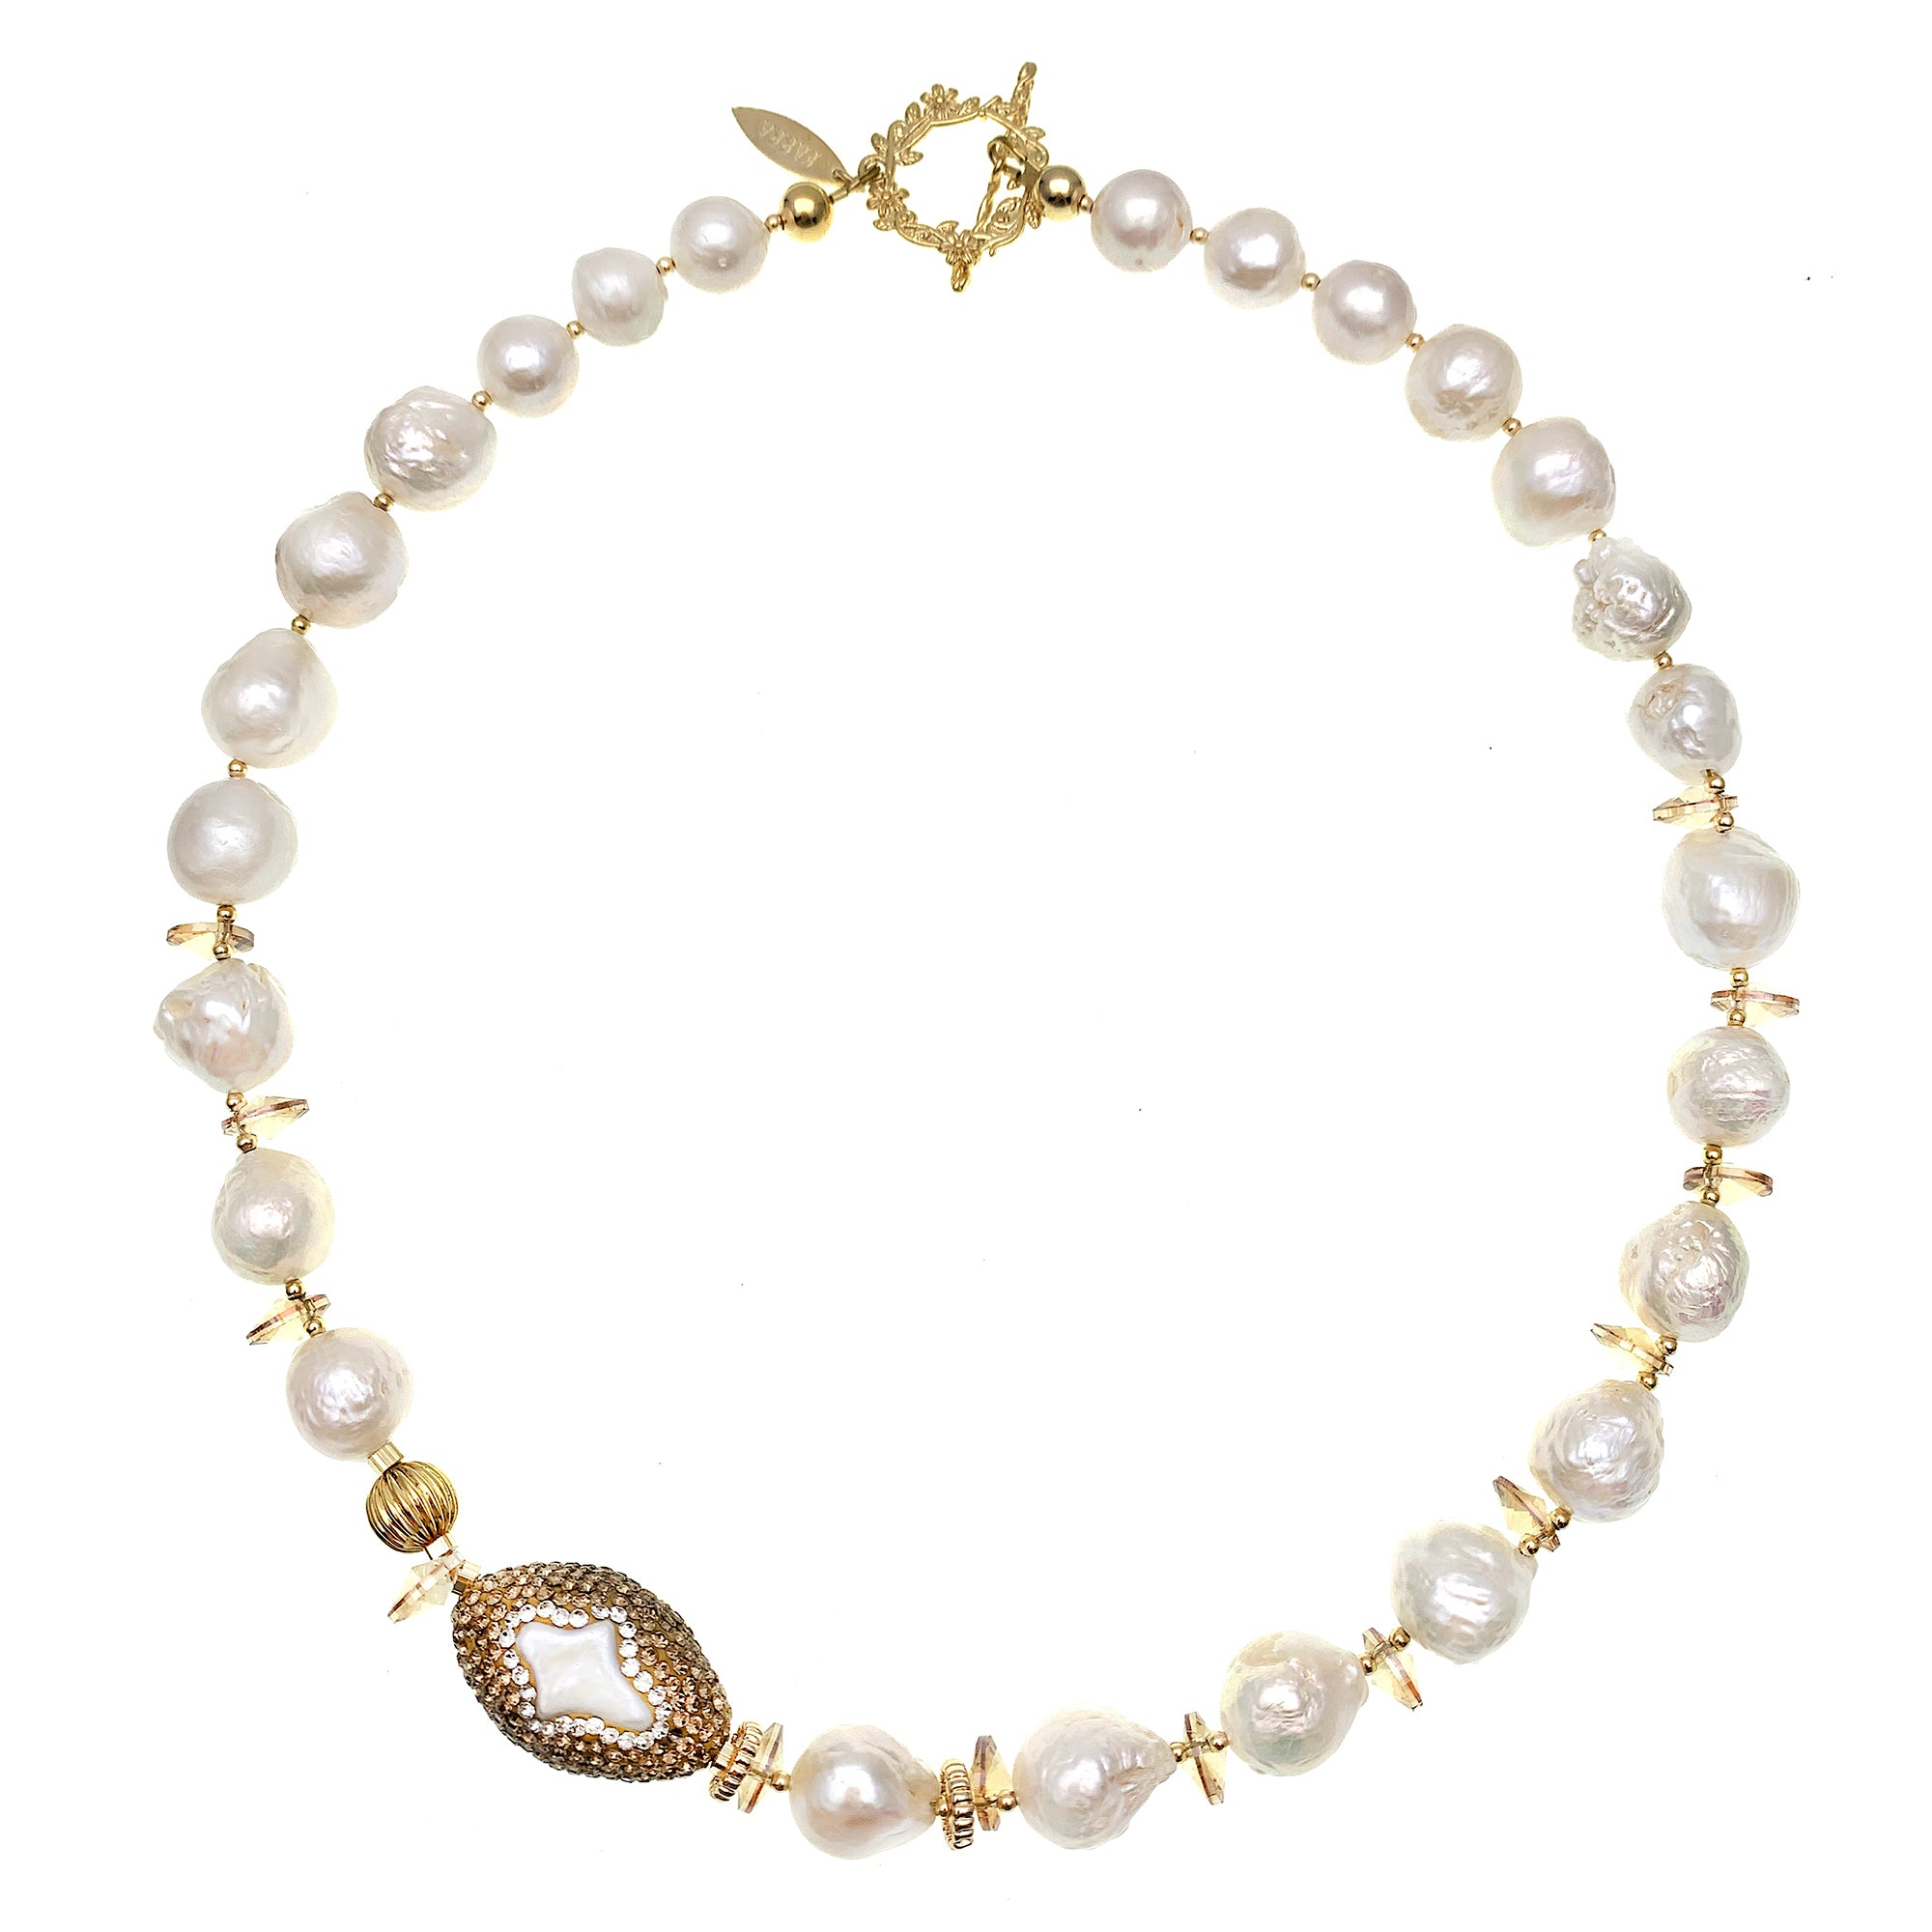 Farra White Pearl, Crystals and Pearl Charm Necklace,FARRA Jewelry - Shopidpearl